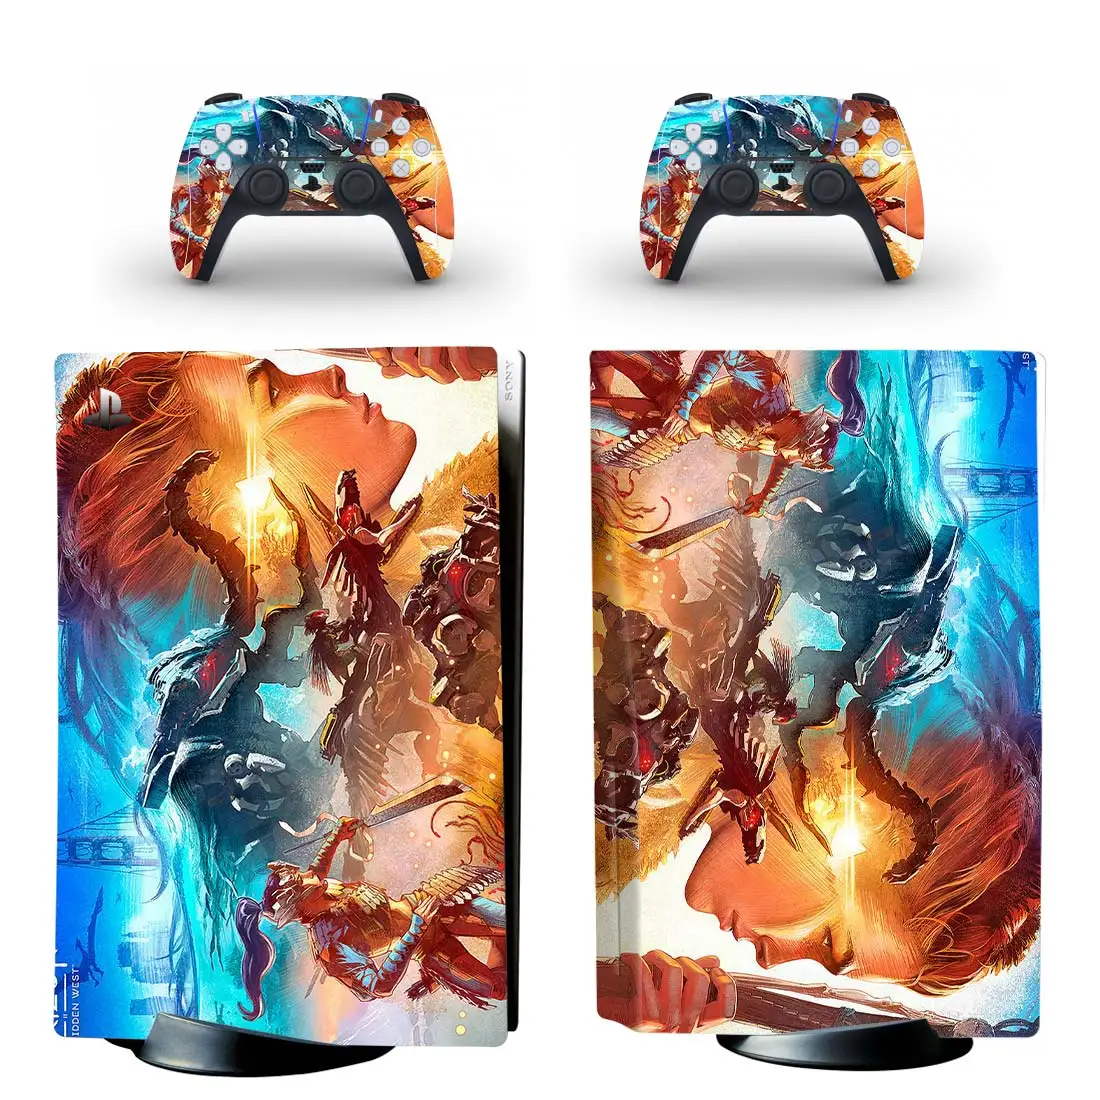 Horizon Zero Dawn Vinyl Decal Ps5 Cd Skin Sticker For Playstation 5 Ps 5 Cd  Version Console And Controller Protective Cover - Stickers - AliExpress